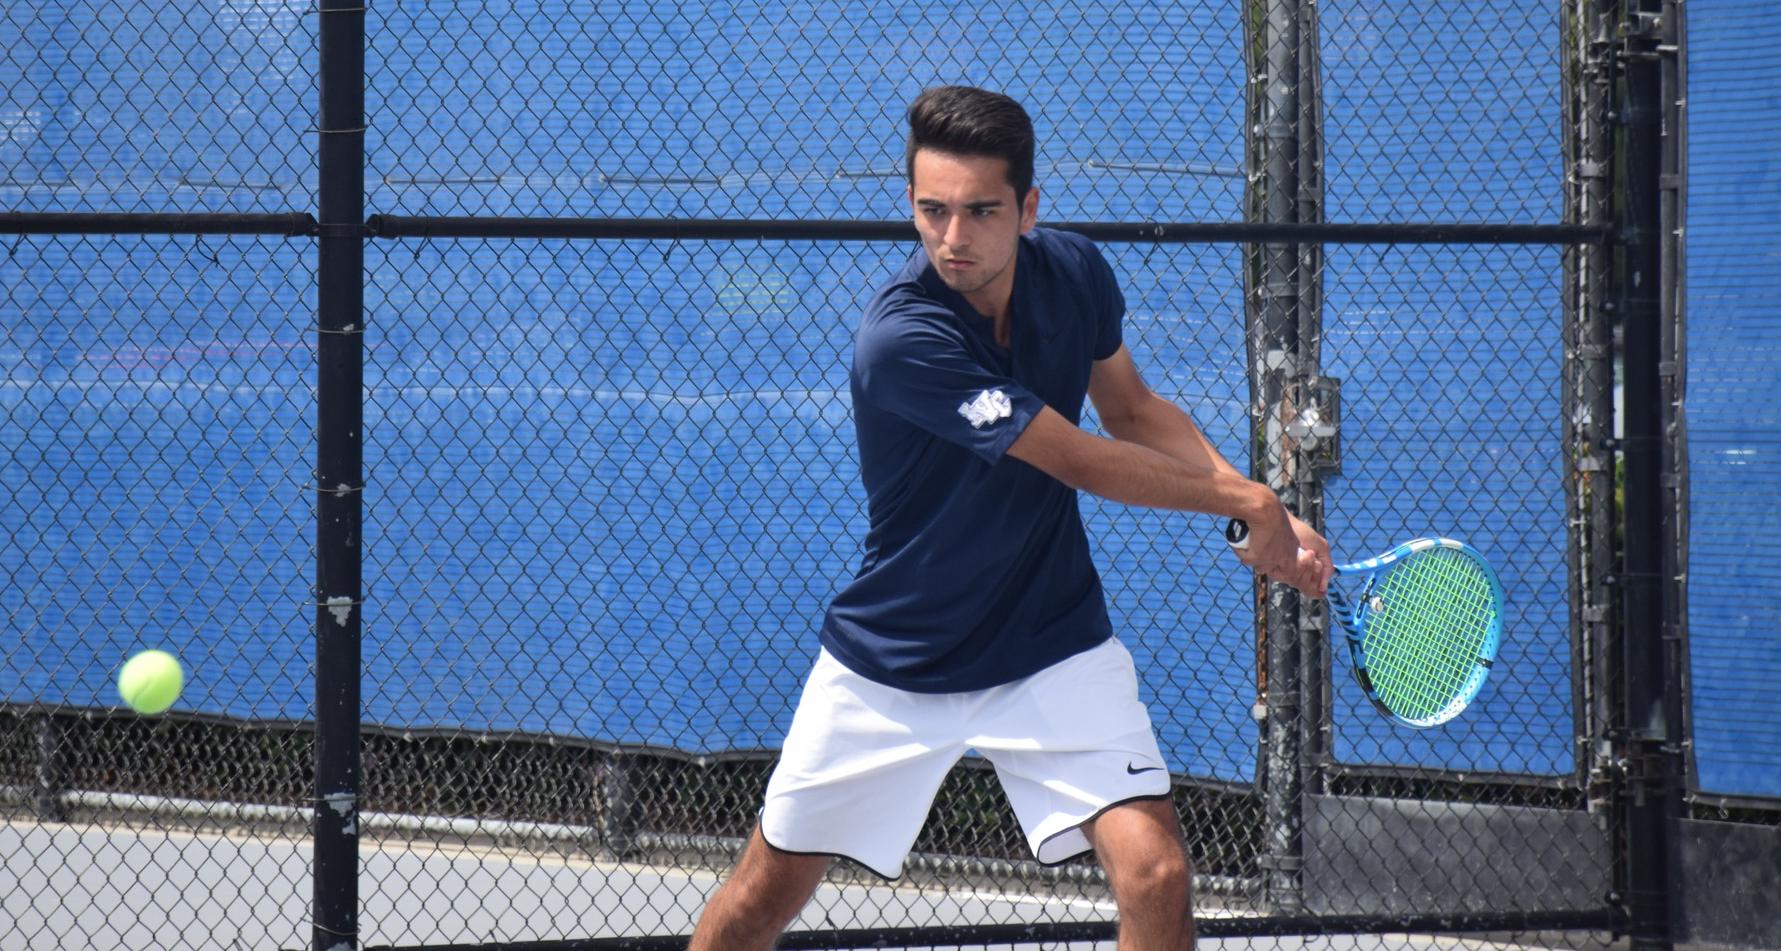 Men's tennis team knocked out of regional playoffs by COD